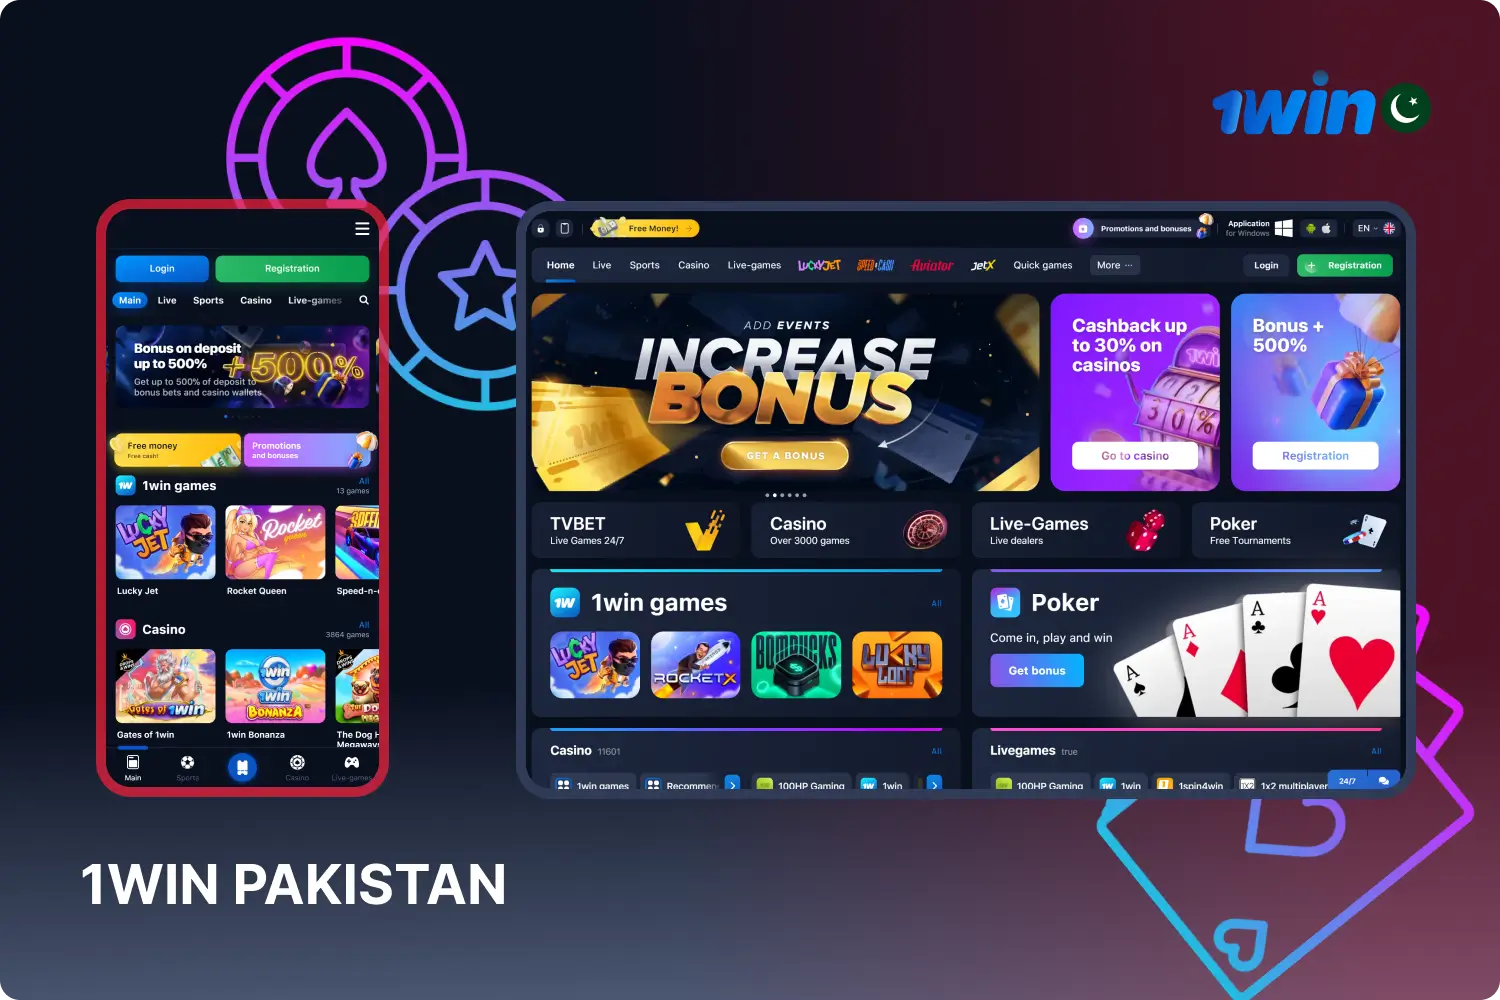 1win Pakistan provides its users with a large selection of casino games and sports betting, offers pleasant bonuses and a comfortable gaming experience